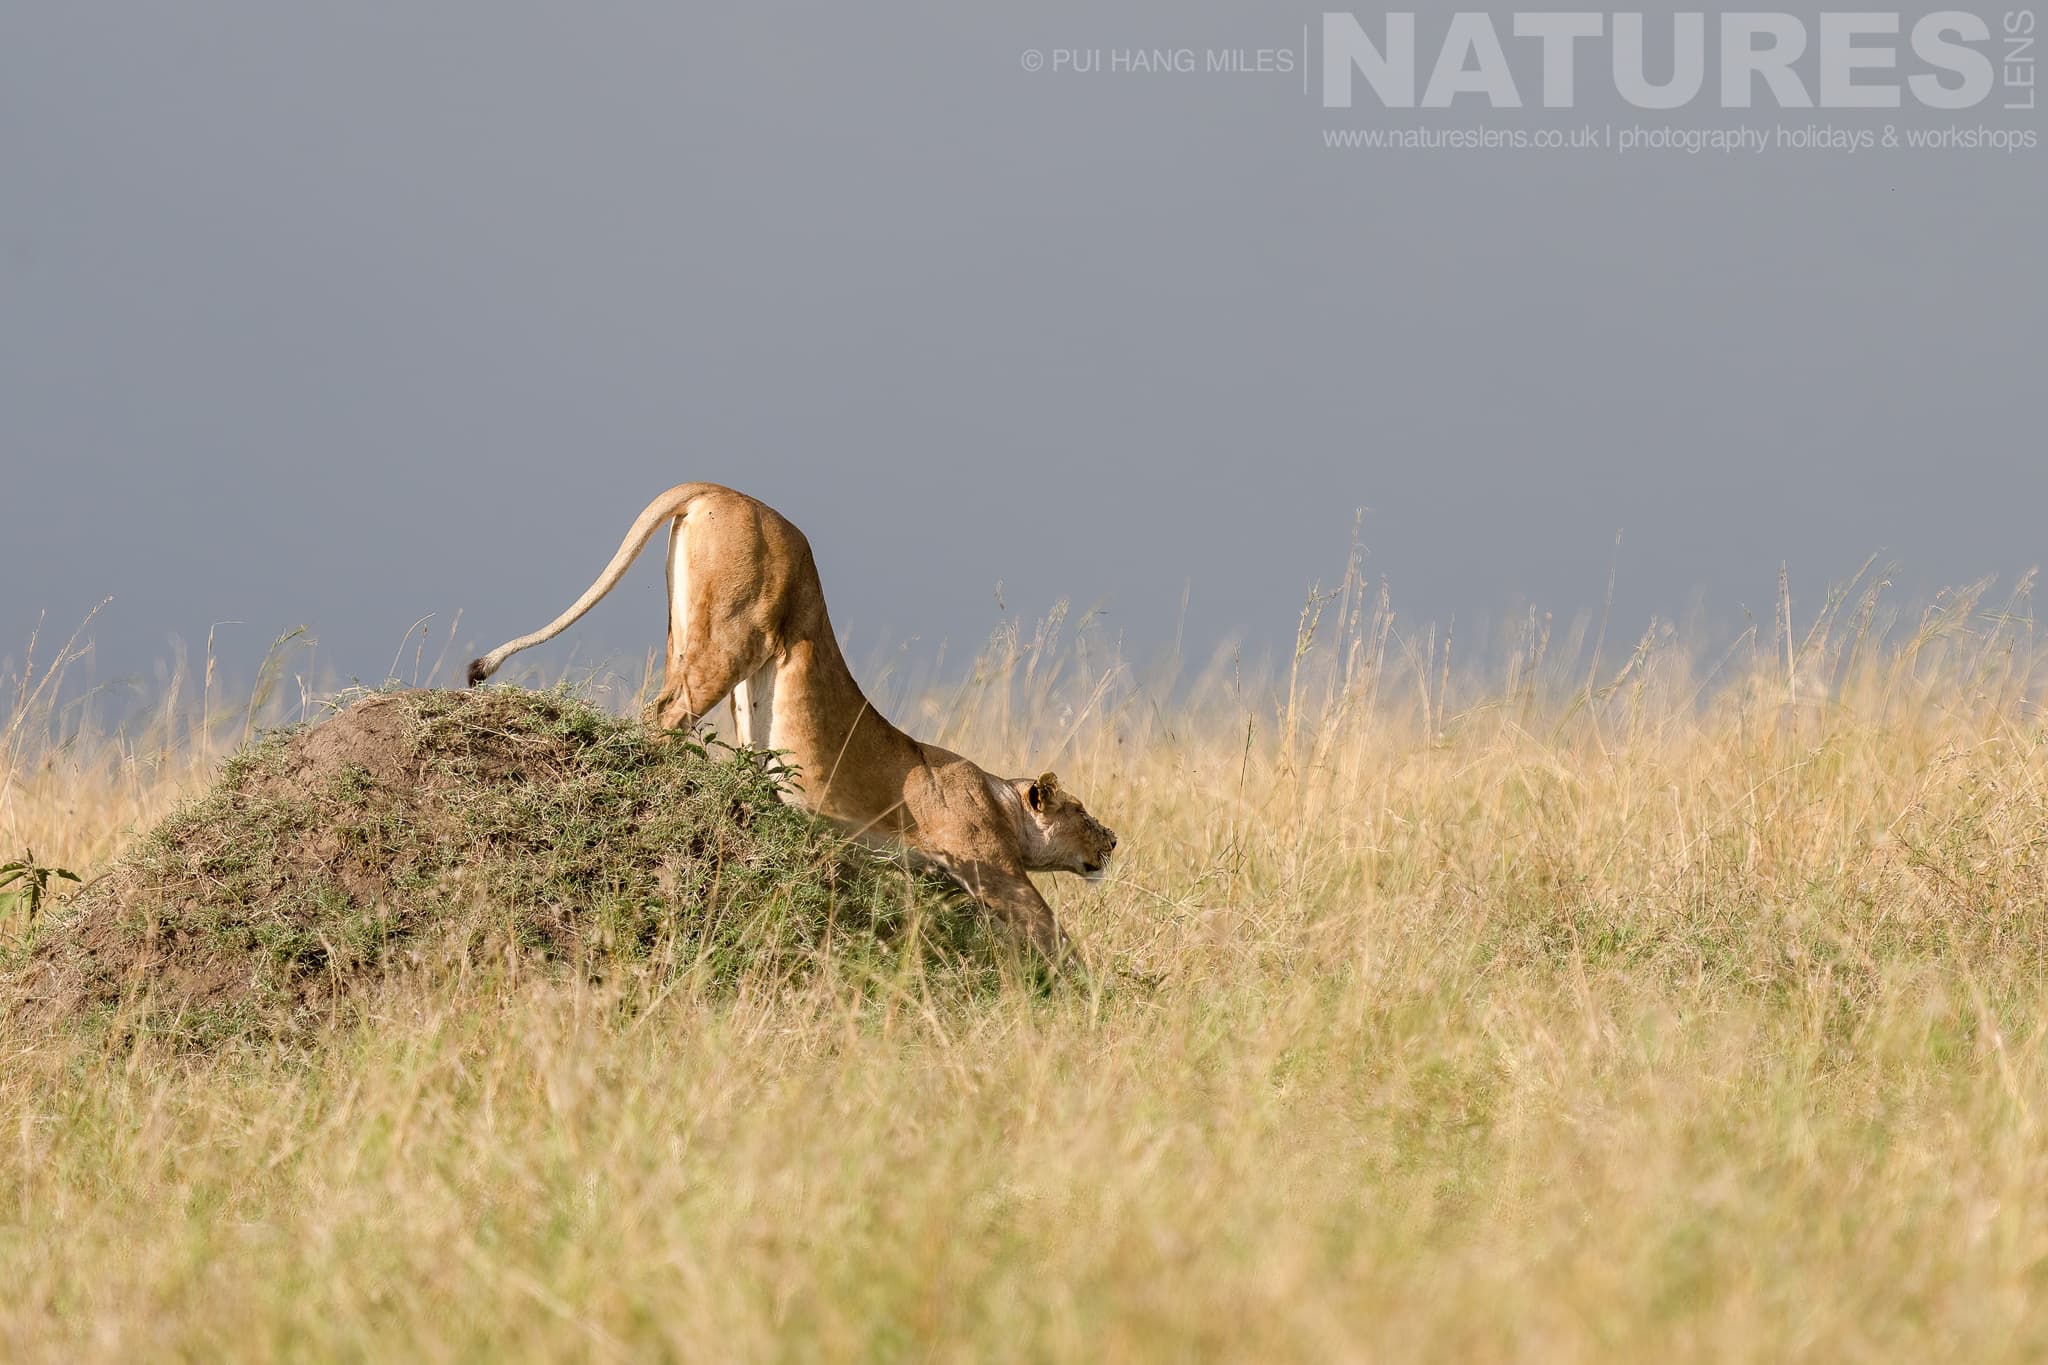 A Lioness From The Topi Pride Stretches As She Descends From A Raised Vantage Point photographed at the locations used for the Ultimate African Wildlife photography holiday